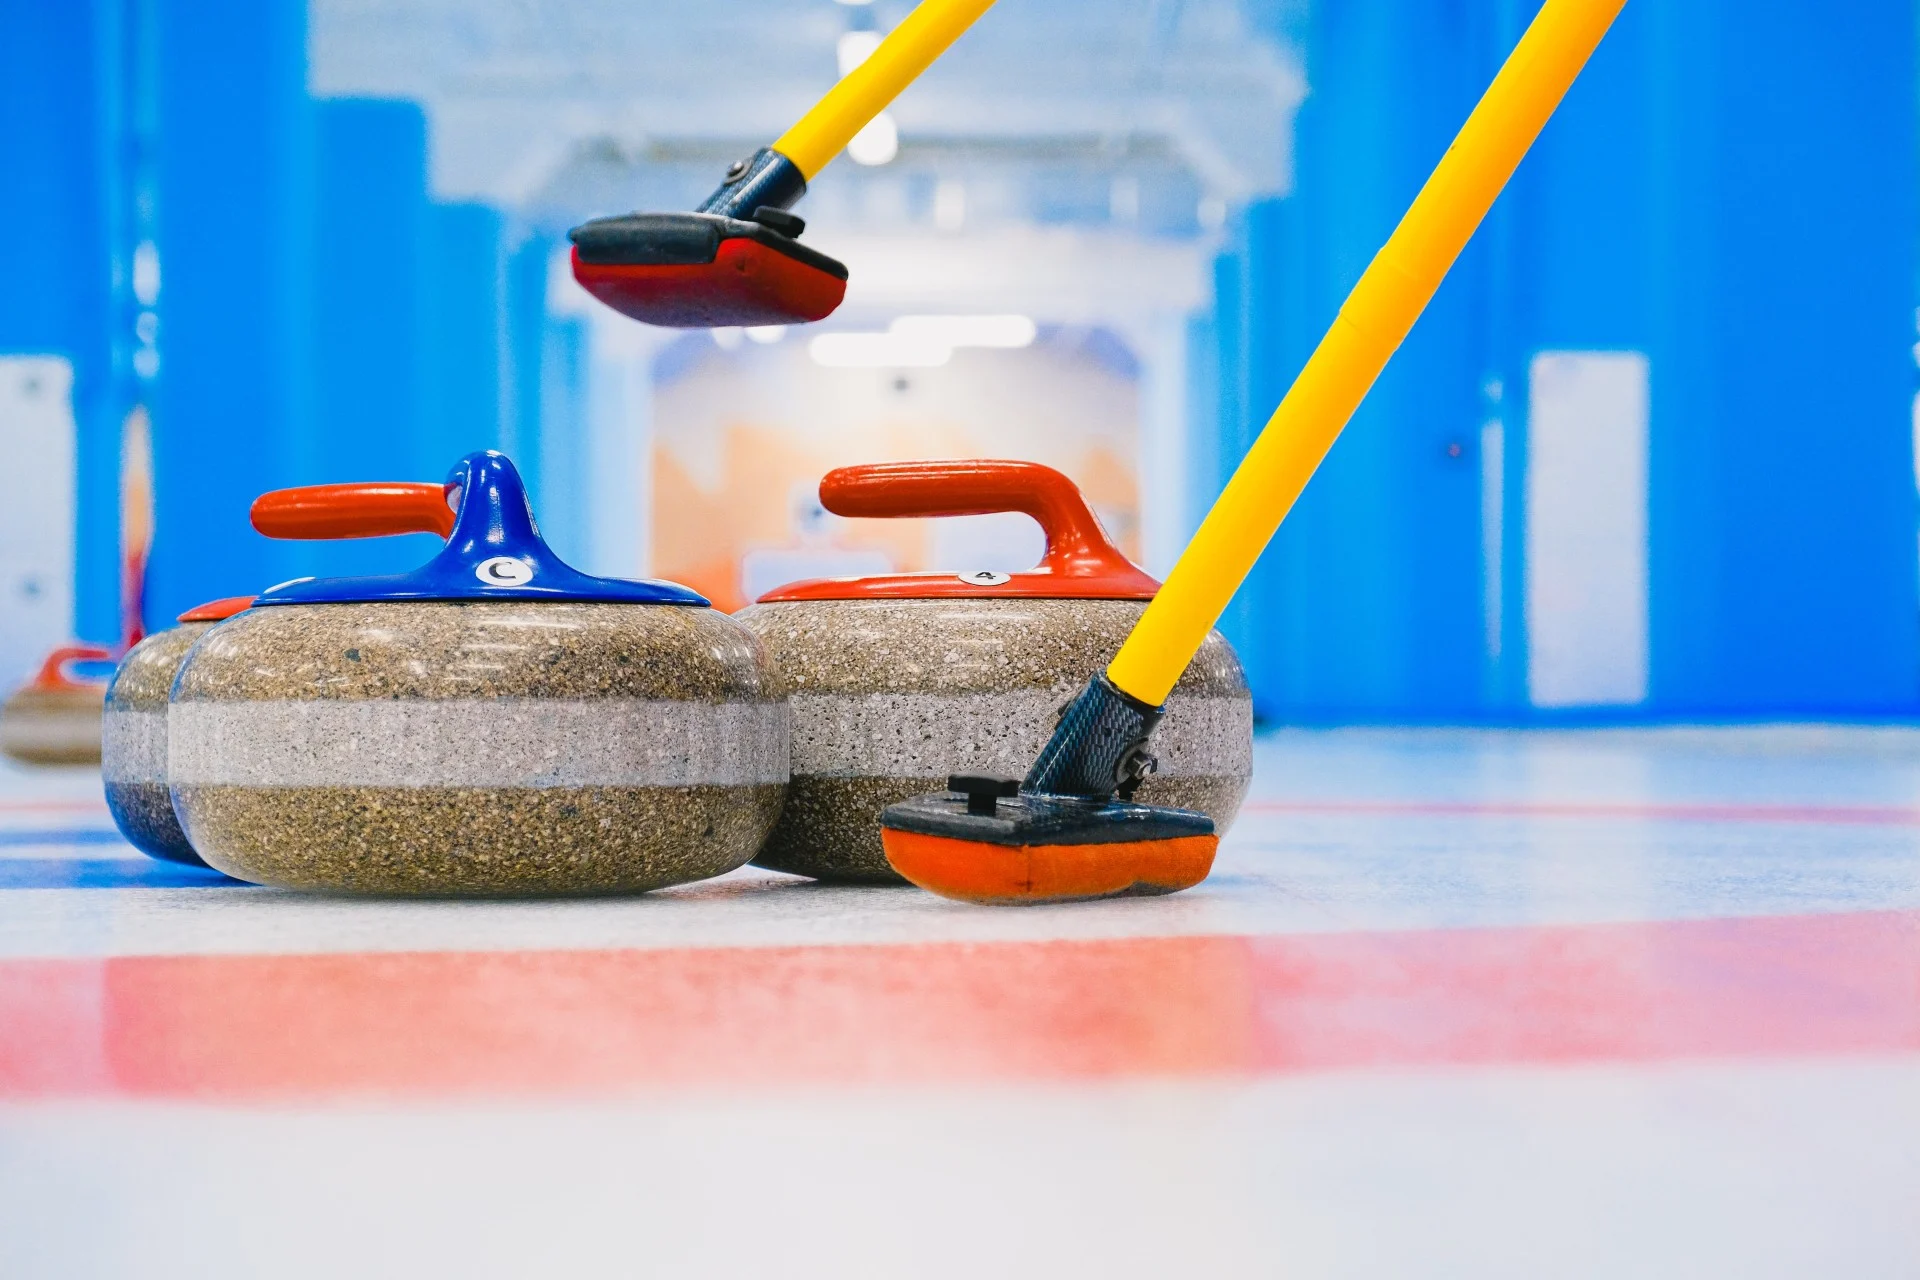 Throwing through the frost: How the weather can affect your curling game